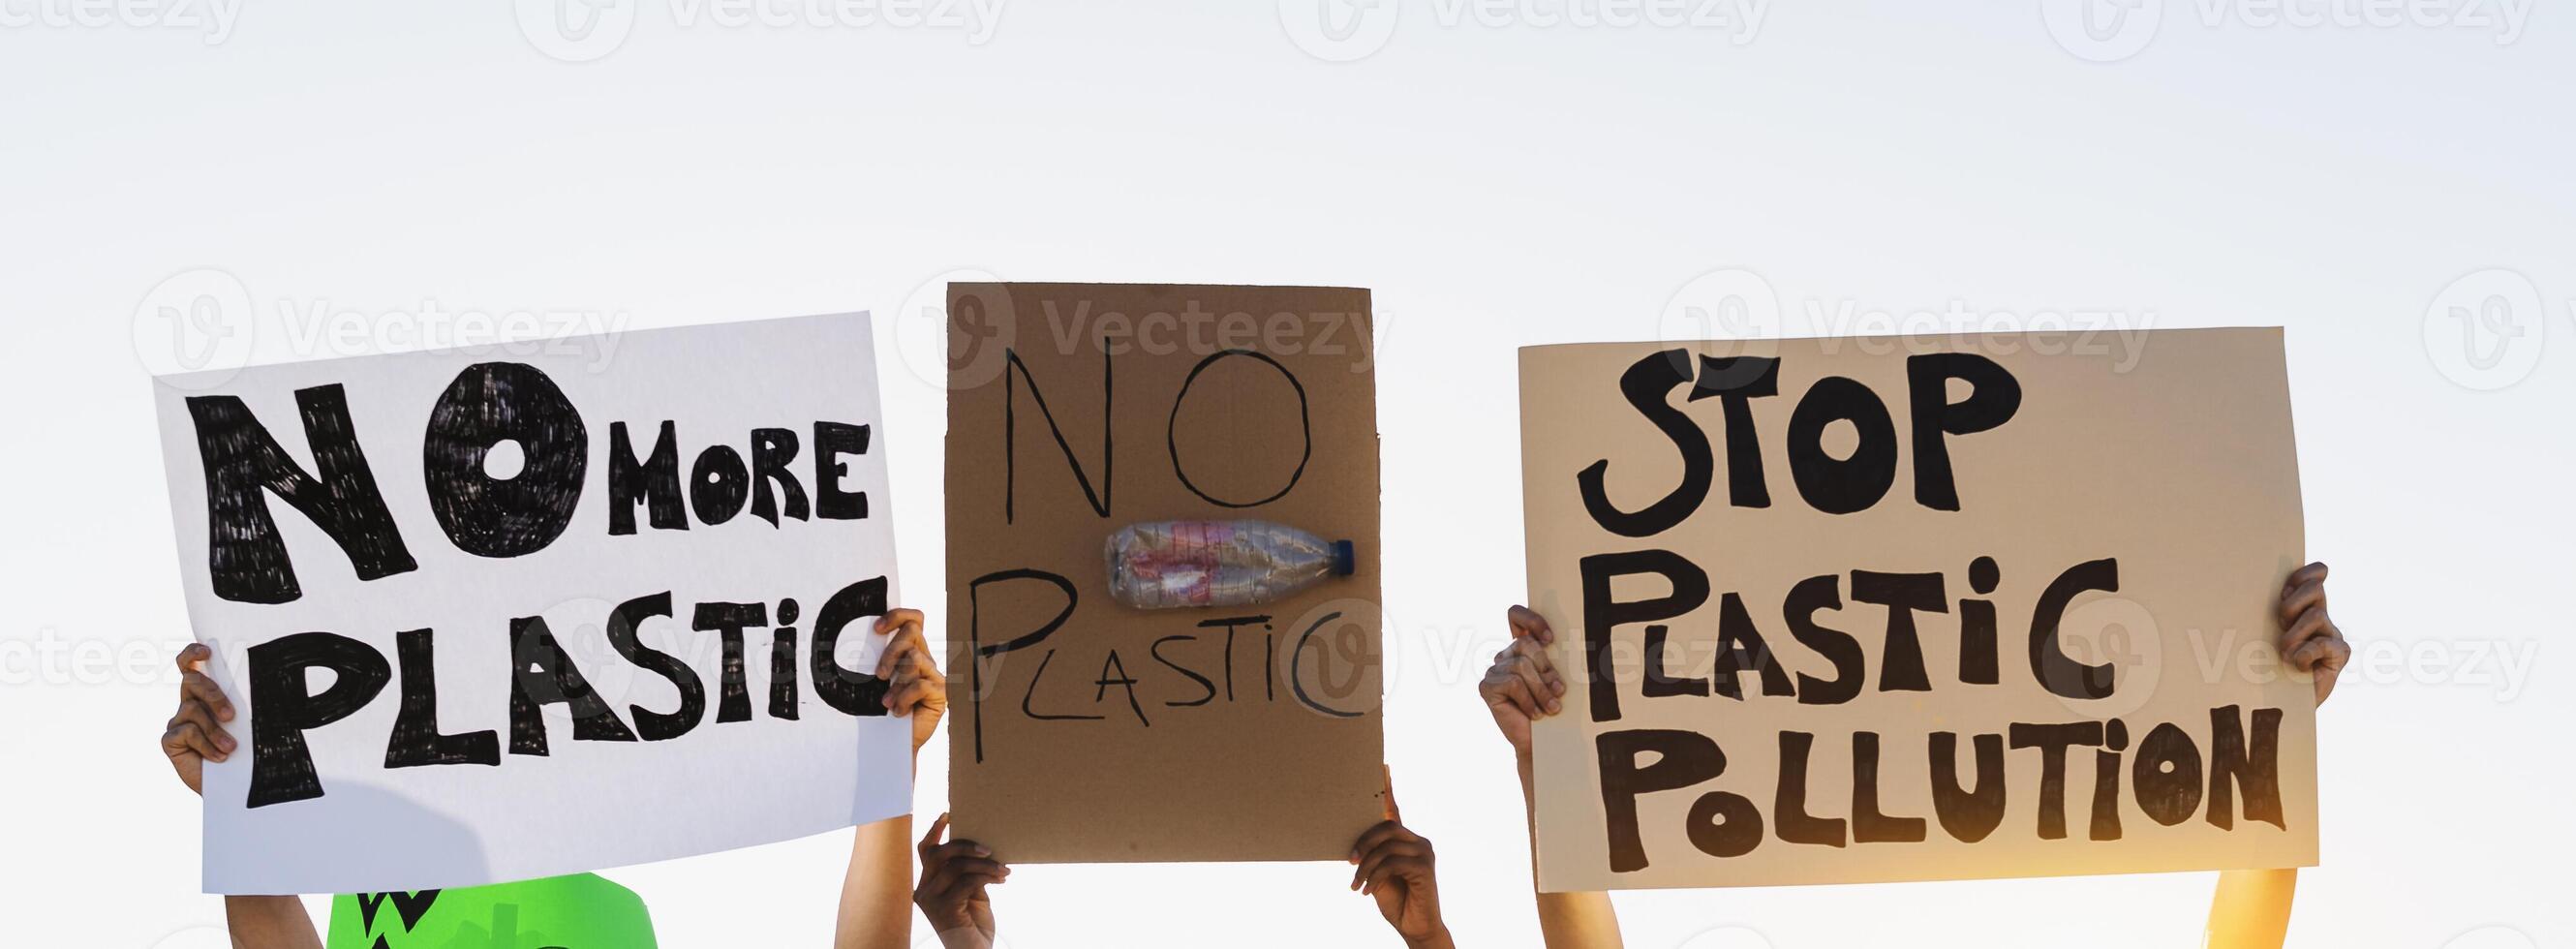 Group demonstrators protesting against plastic pollution and climate change - Multiracial people fighting on road holding banners on environments disasters - Global warming concept photo